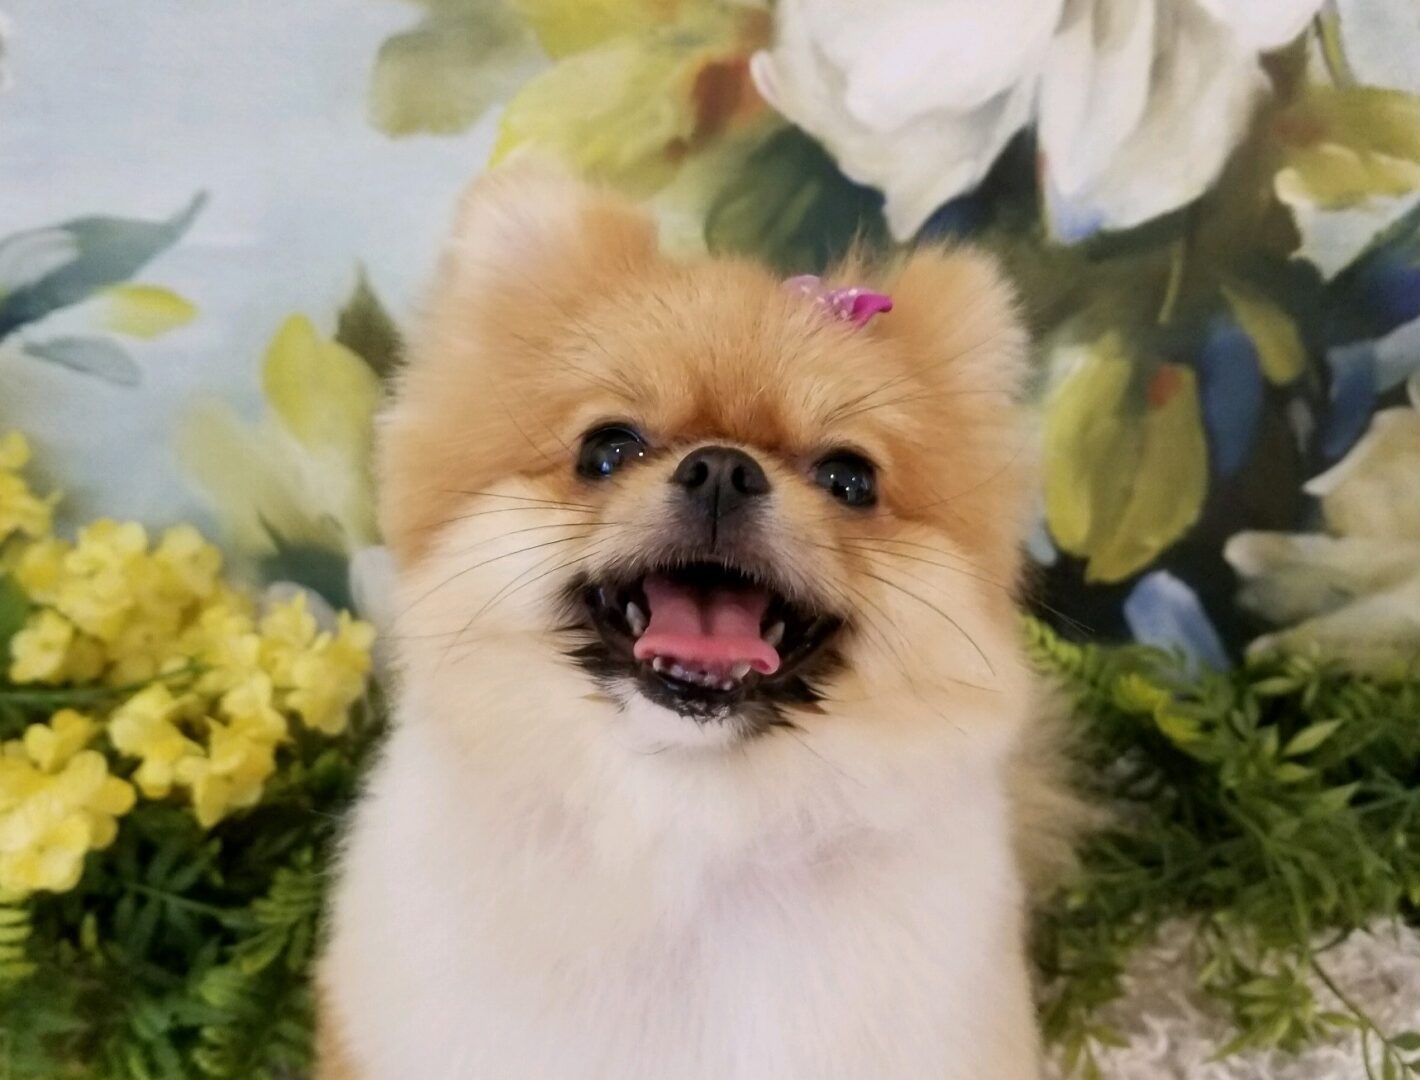 A Pomeranian with a pink bow